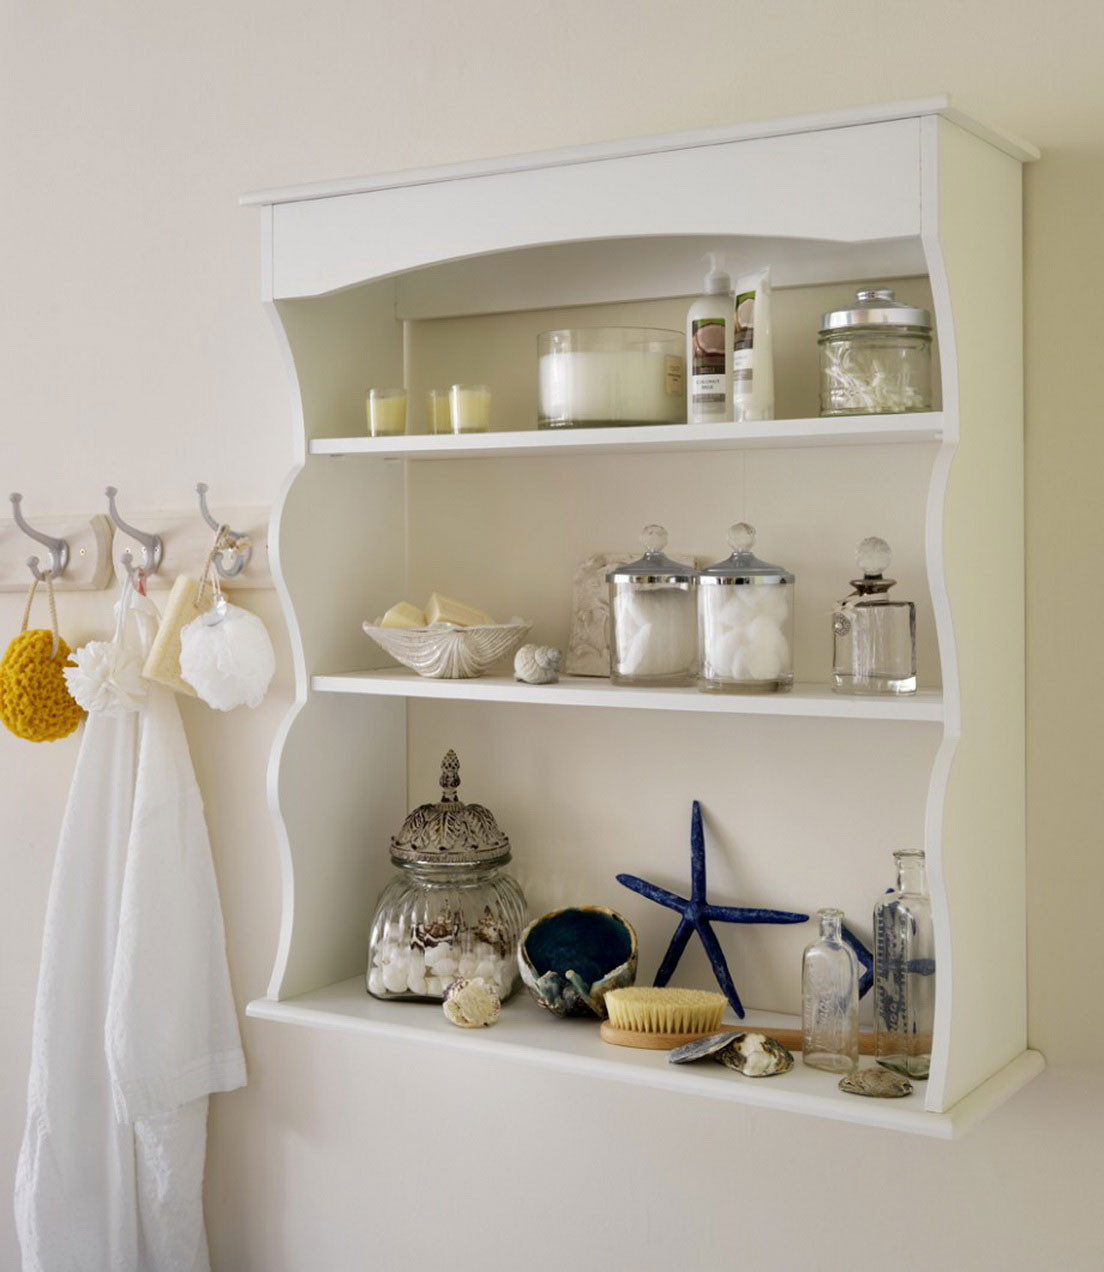 Kitchen Wall Storage
 Wall Shelving Ideas for Your Kitchen Storage Solution